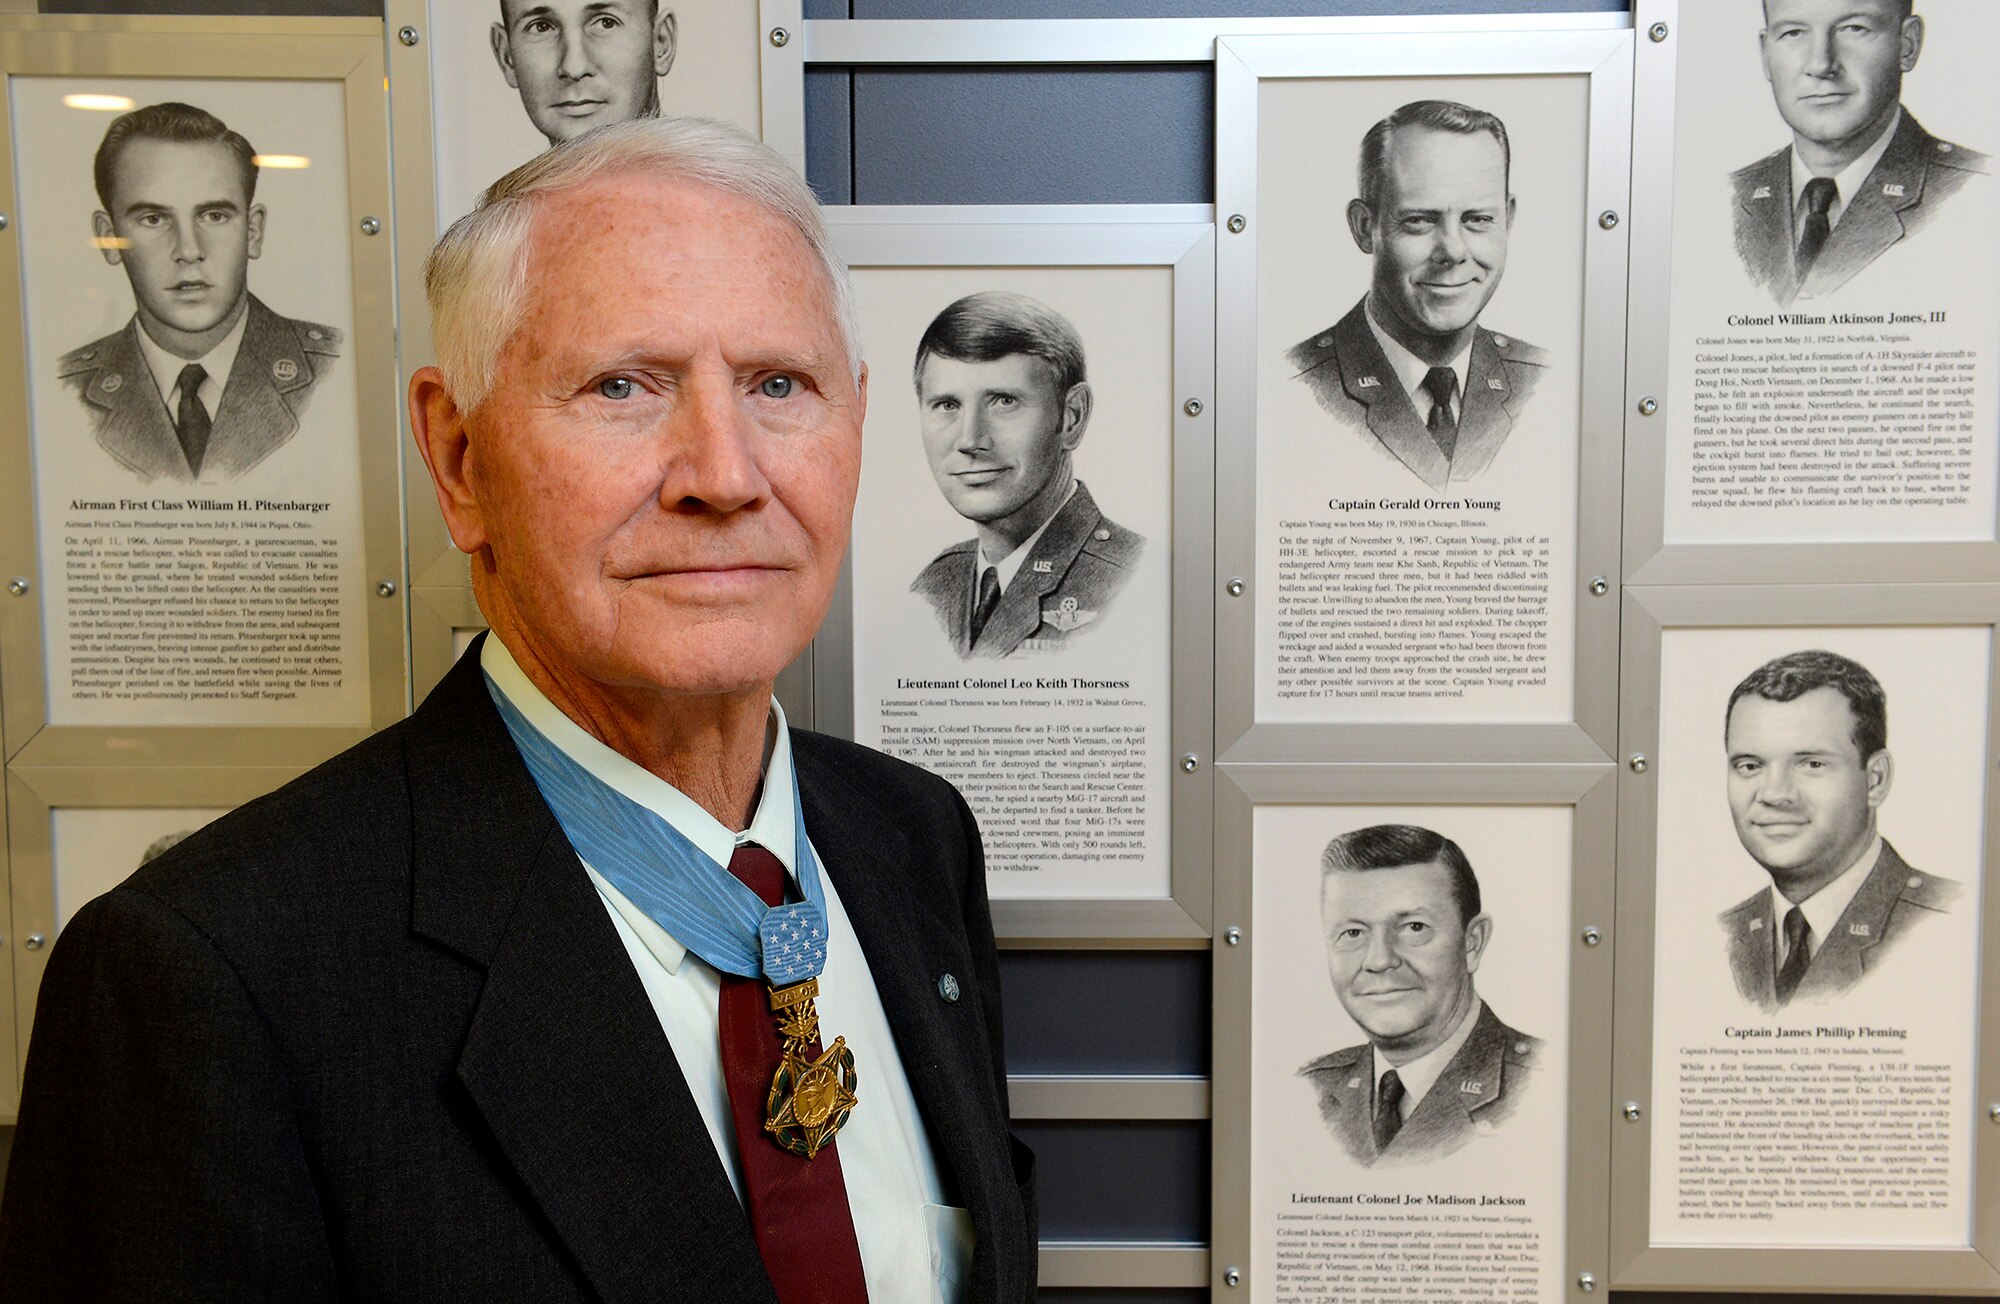 Retired Col. Leo Thorsness poses with a permanent Medal of Honor display March 24, 2015, at the Pentagon in Washington D.C. The display depicts him and other medal recipients.  Thorsness was in the Pentagon with fellow Medal of Honor recipient, Joe Jackson for a Q-and-A session with members of the Air Staff, hosted in the Hall of Heroes.  Jackson and Thorsness also met with Secretary of the Air Force Deborah Lee James and Air Force Vice Chief of Staff Gen. Larry Spencer. (U.S. Air Force photo/Scott M. Ash) 